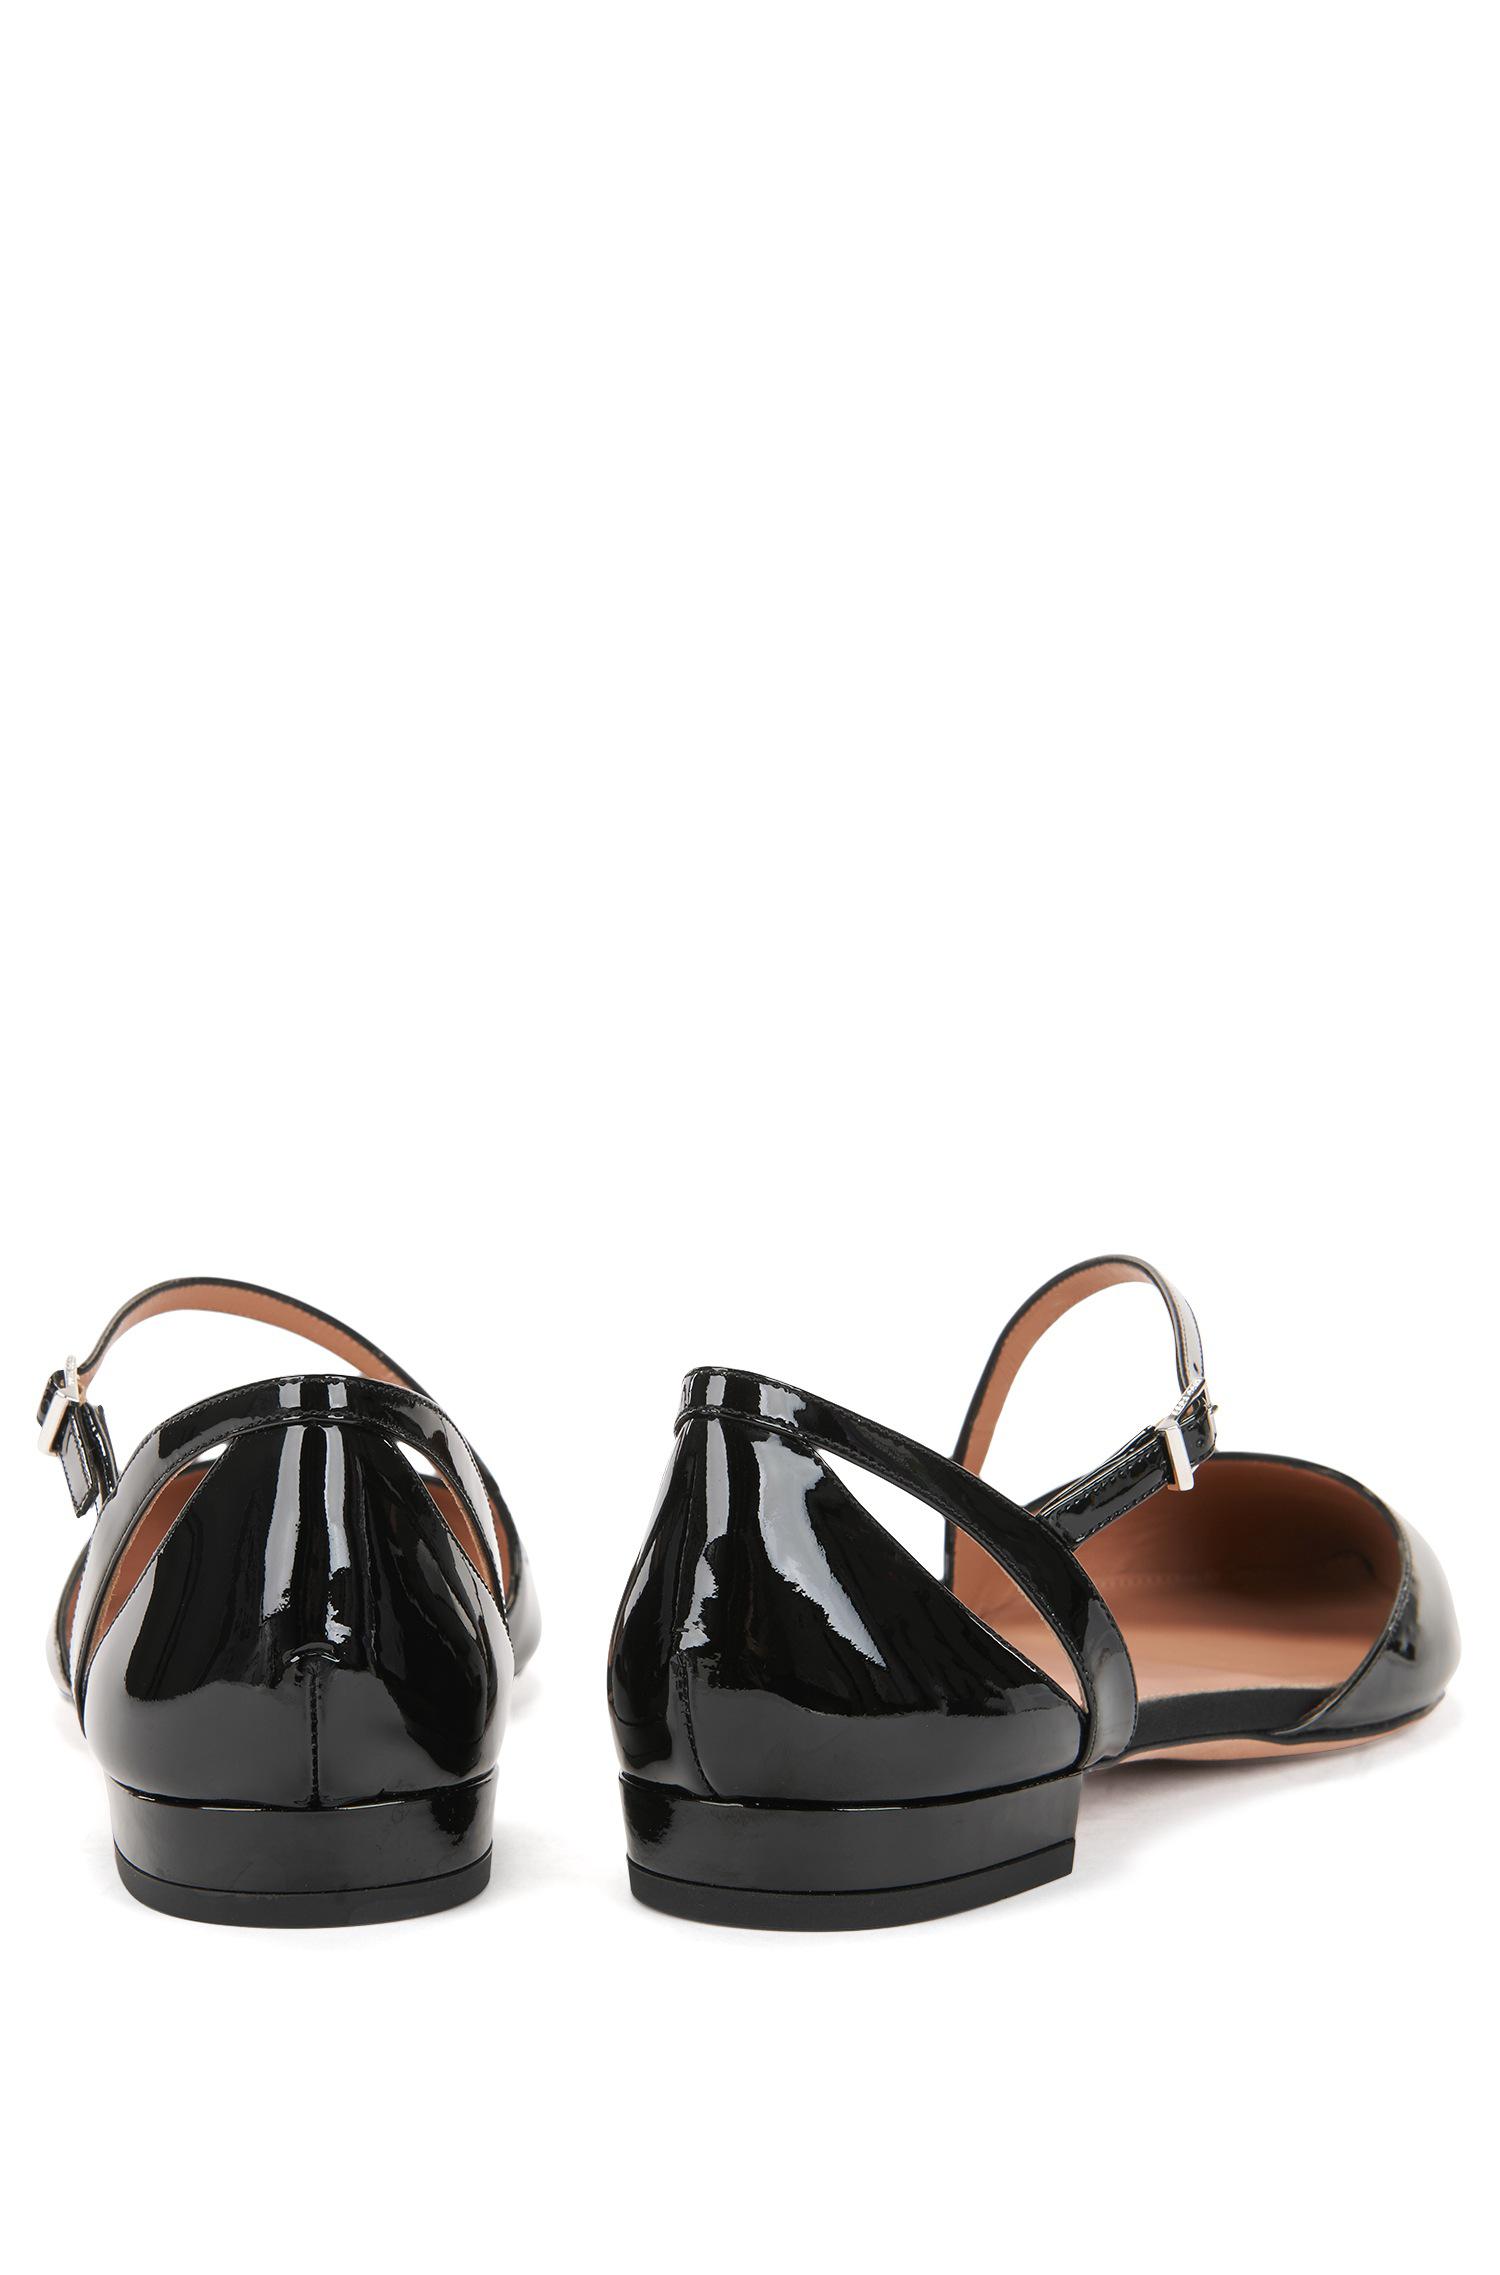 BOSS by HUGO BOSS Patent Calf-leather Ballerina Pumps With Asymmetric Strap  in Black | Lyst Canada